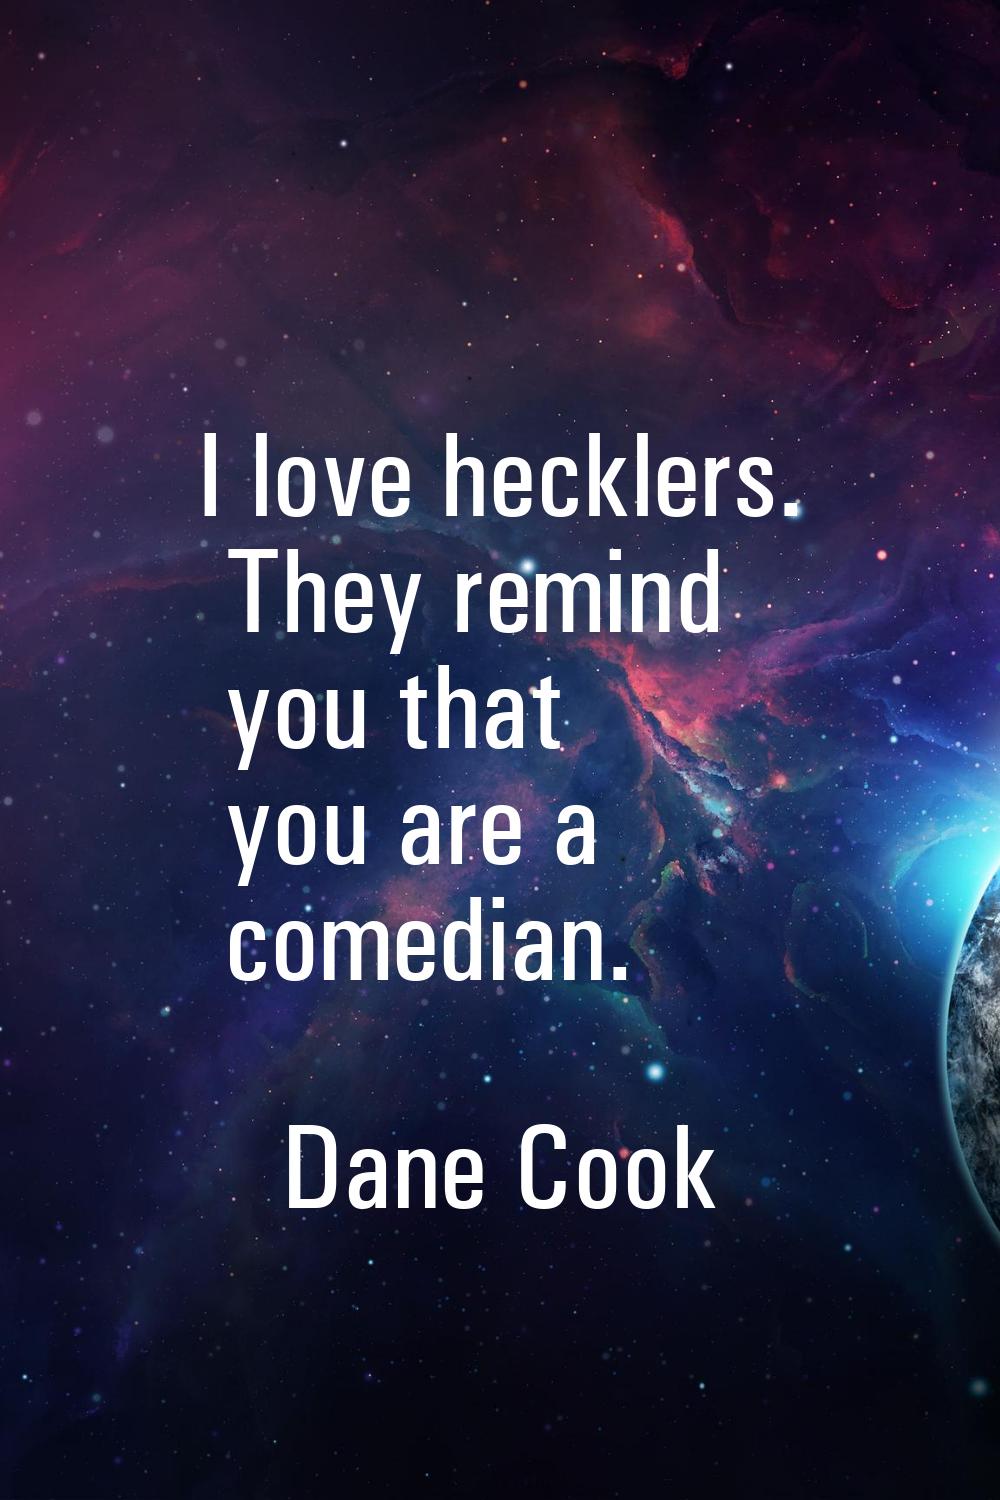 I love hecklers. They remind you that you are a comedian.